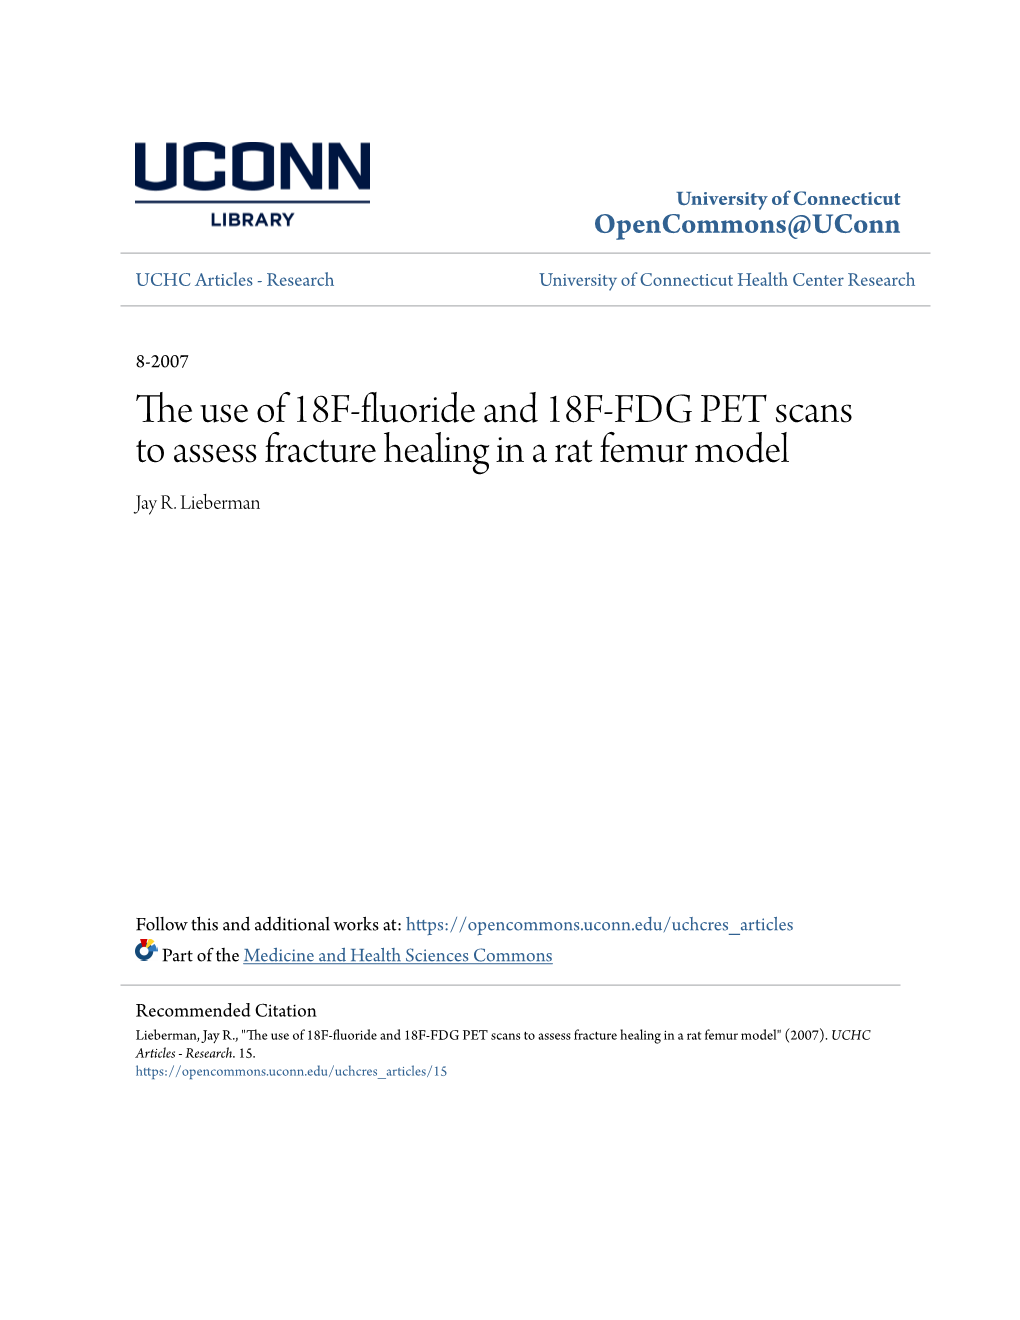 The Use of 18F-Fluoride and 18F-FDG PET Scans to Assess Fracture Healing in a Rat Femur Model" (2007)